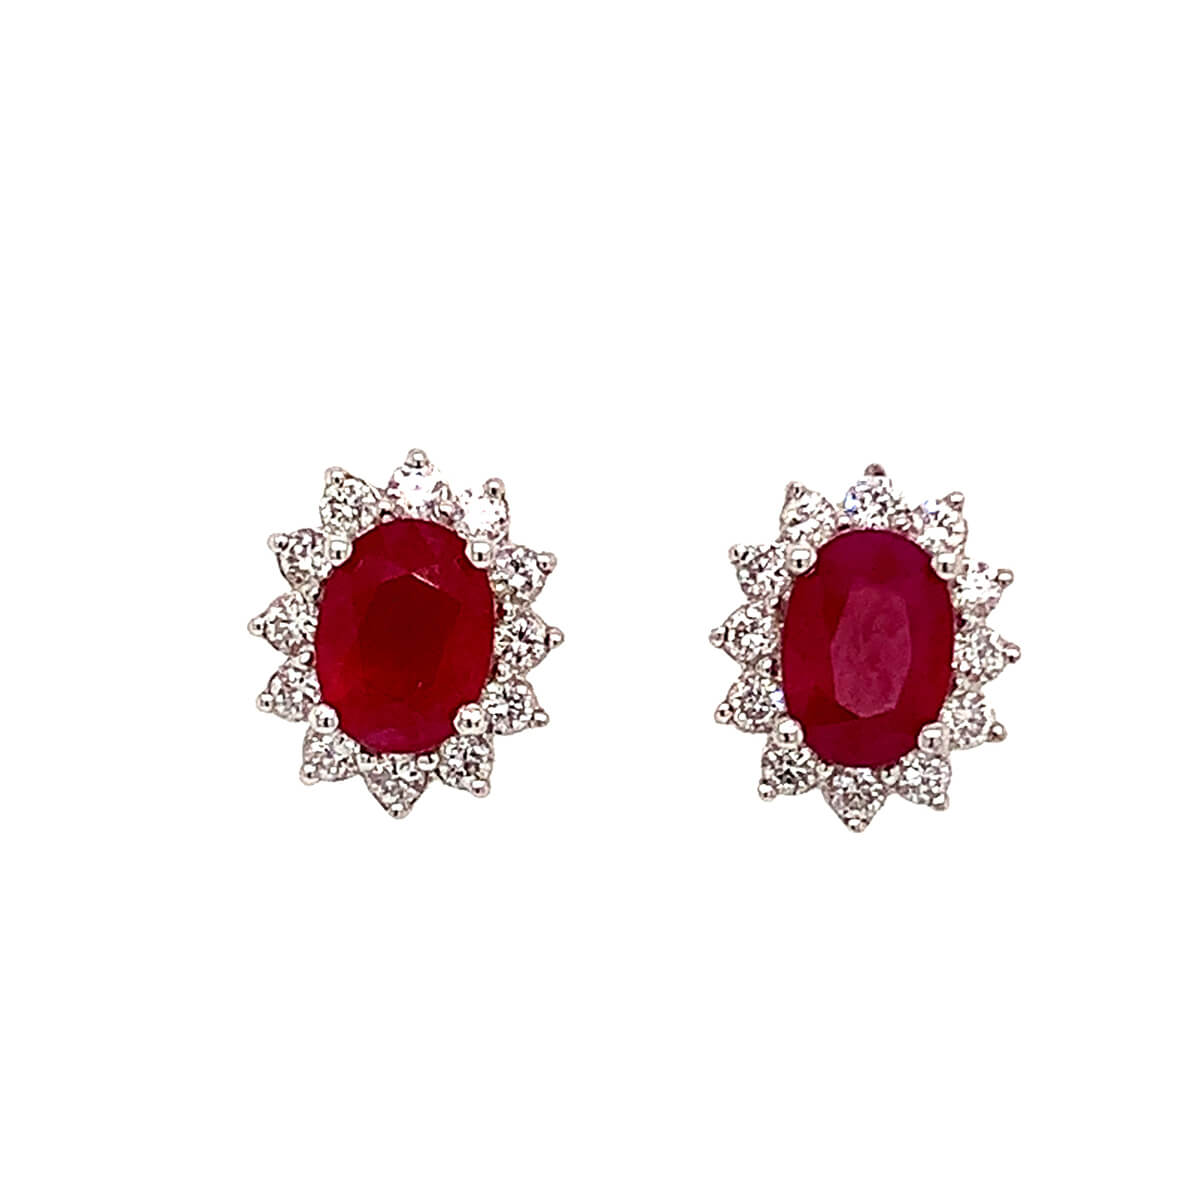 18ct White Gold, Oval Shaped Ruby & Diamond Cluster Earrings